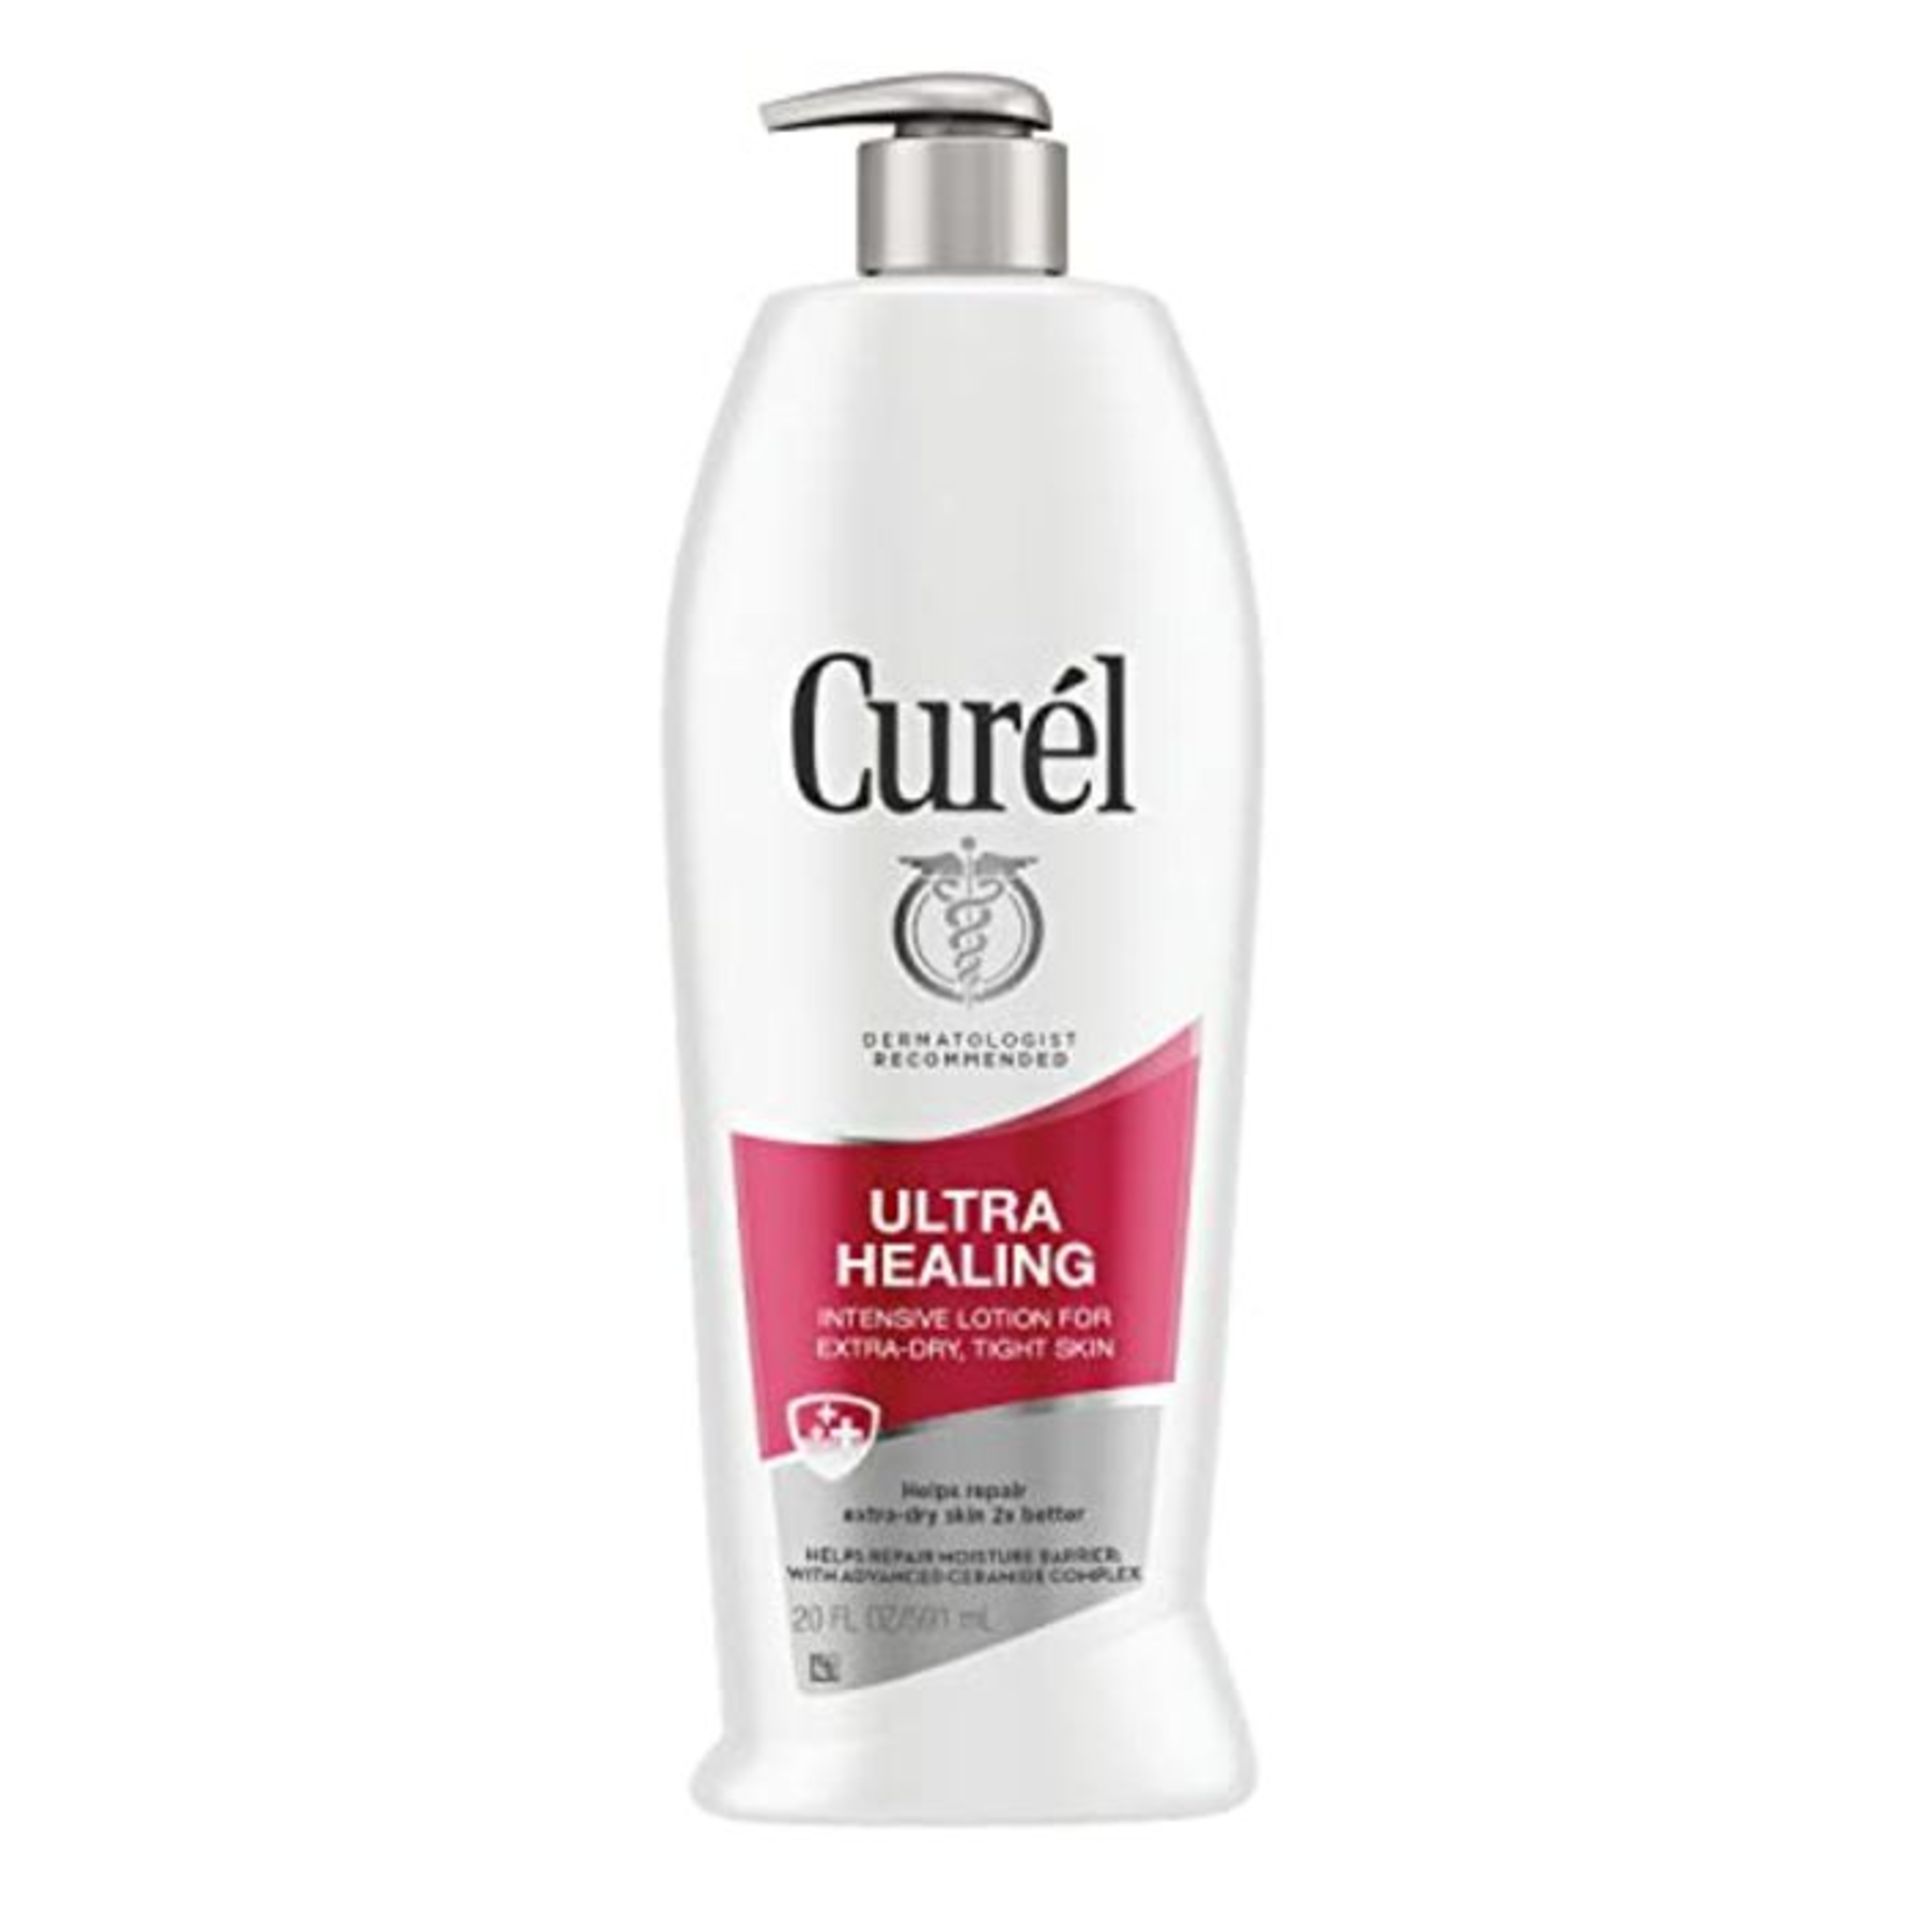 [CRACKED] Curél Ultra Healing Intensive Lotion for Extra-Dry, Tight Skin, 20 Ounces